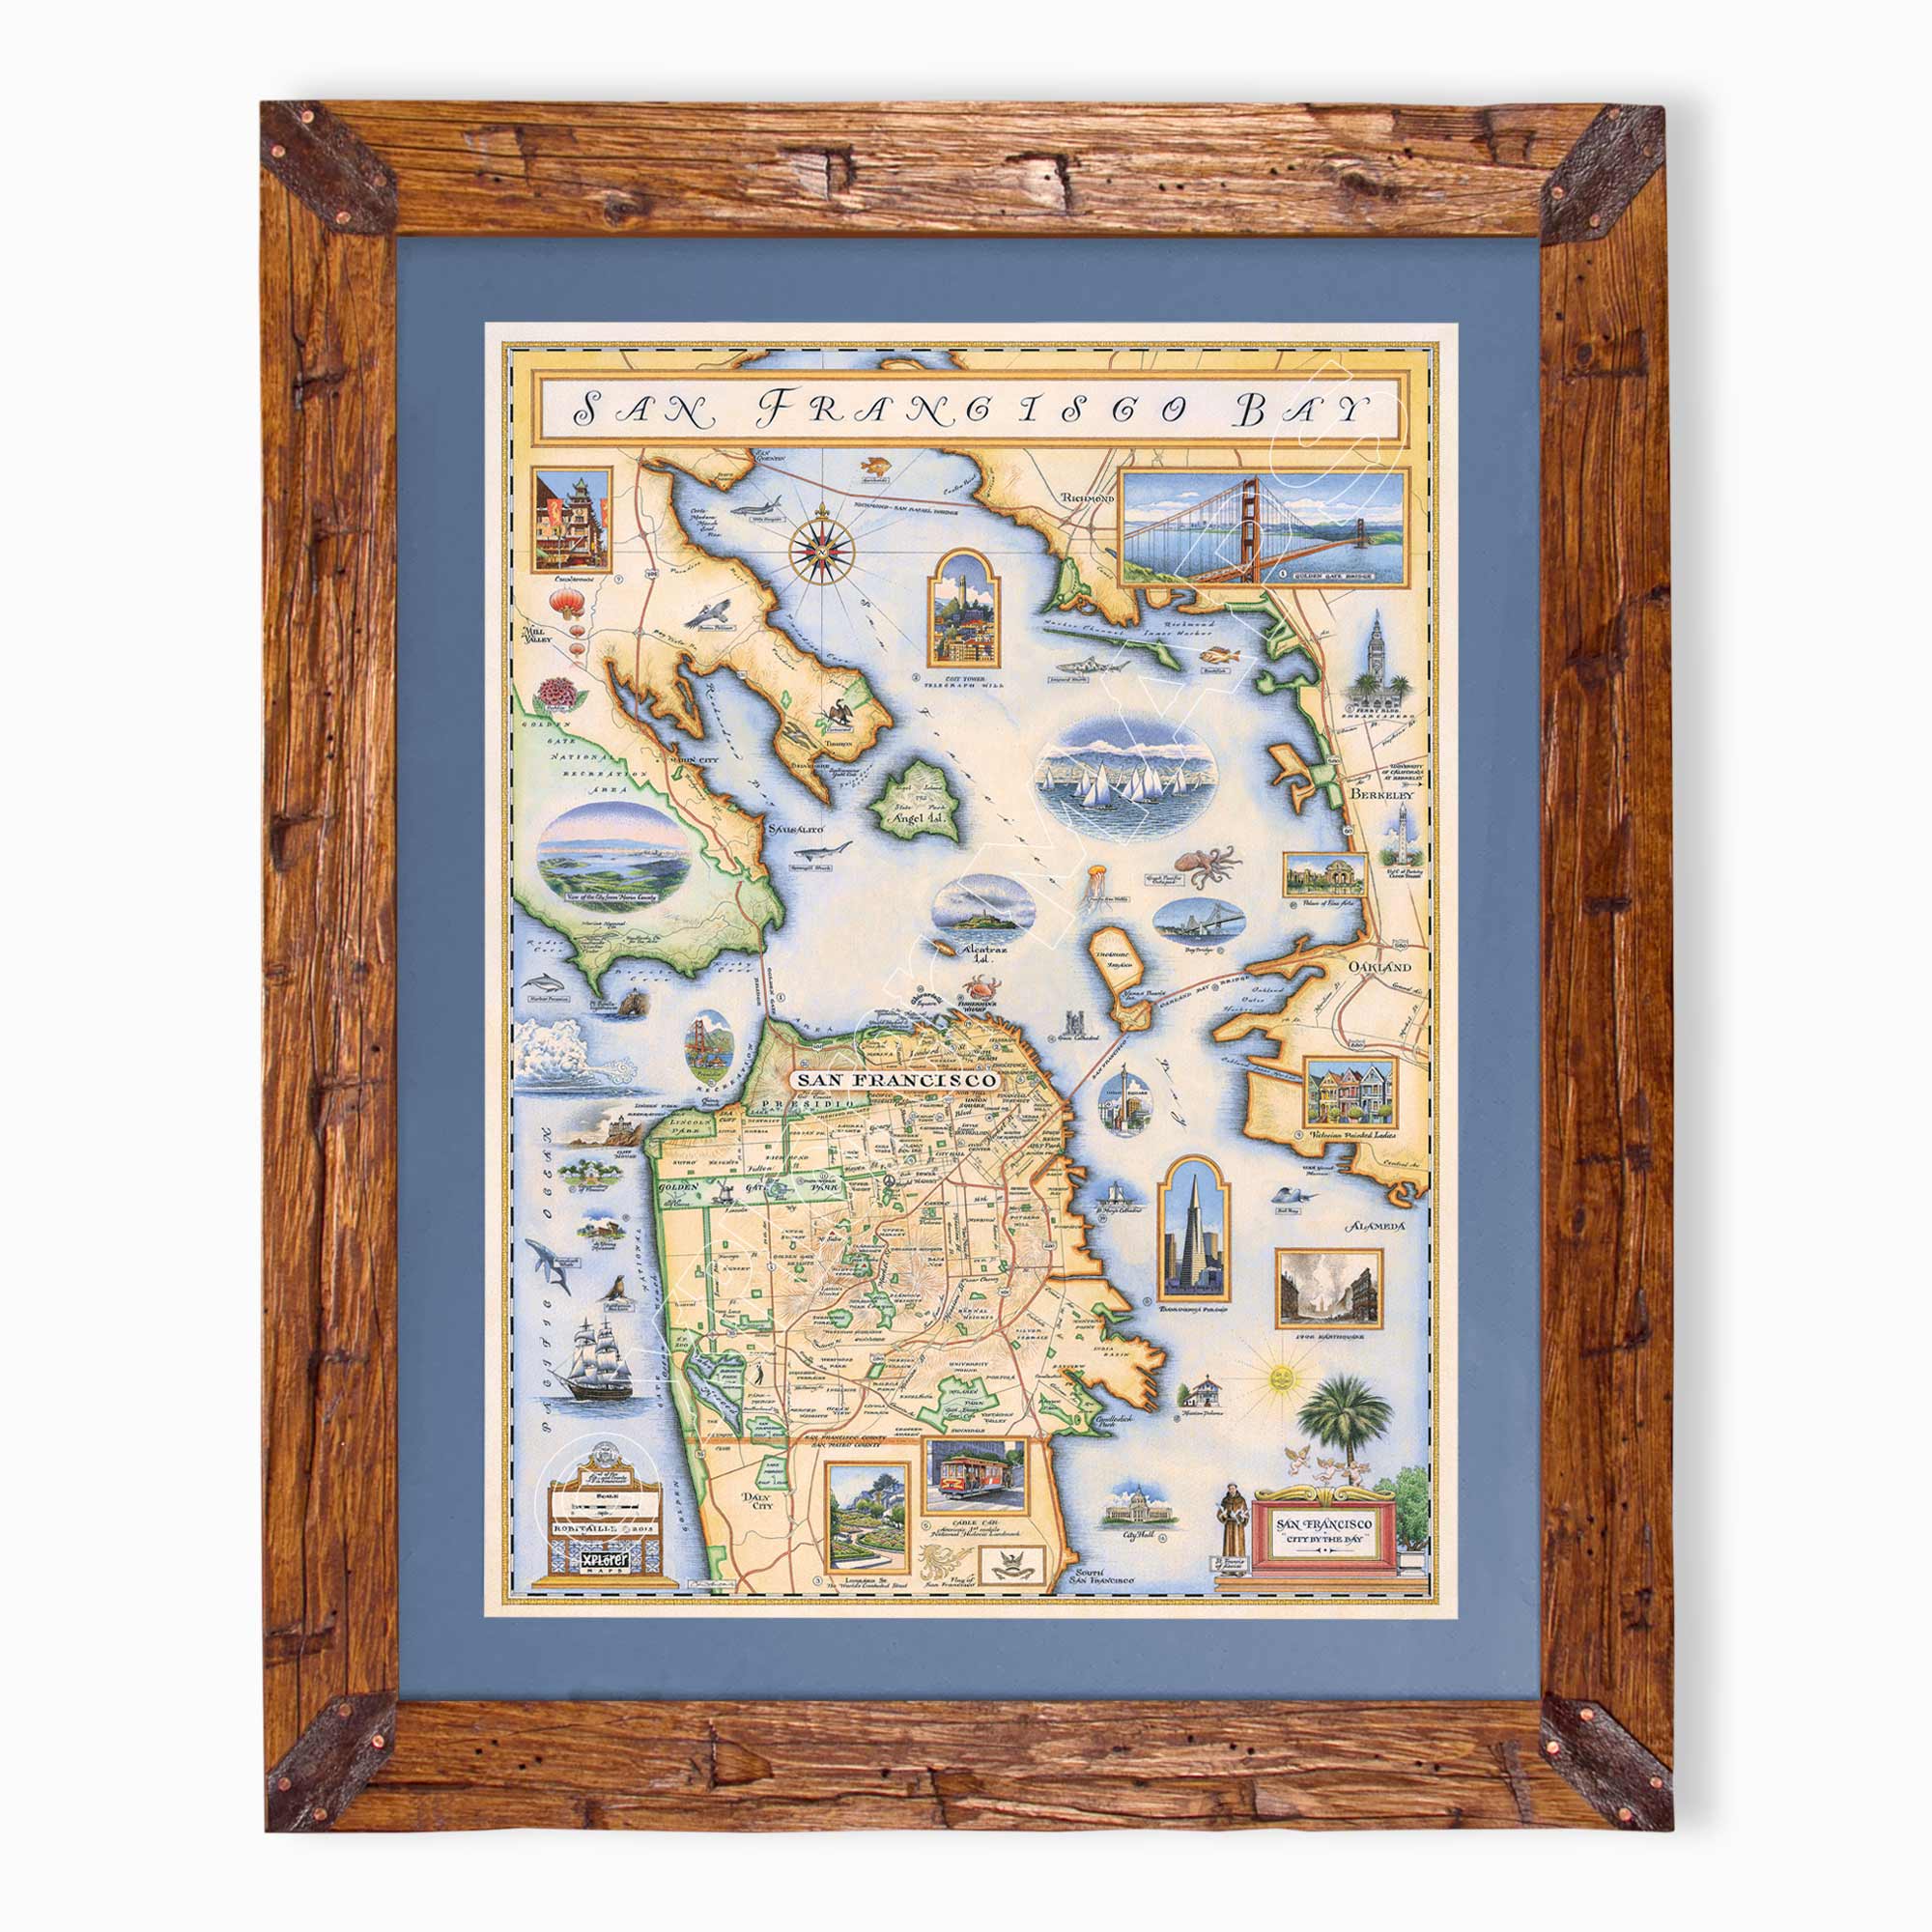 San Francisco Bay hand-drawn map in earth tones blues and greens. The map print is framed in Montana hand-scraped pine with a blue mat.